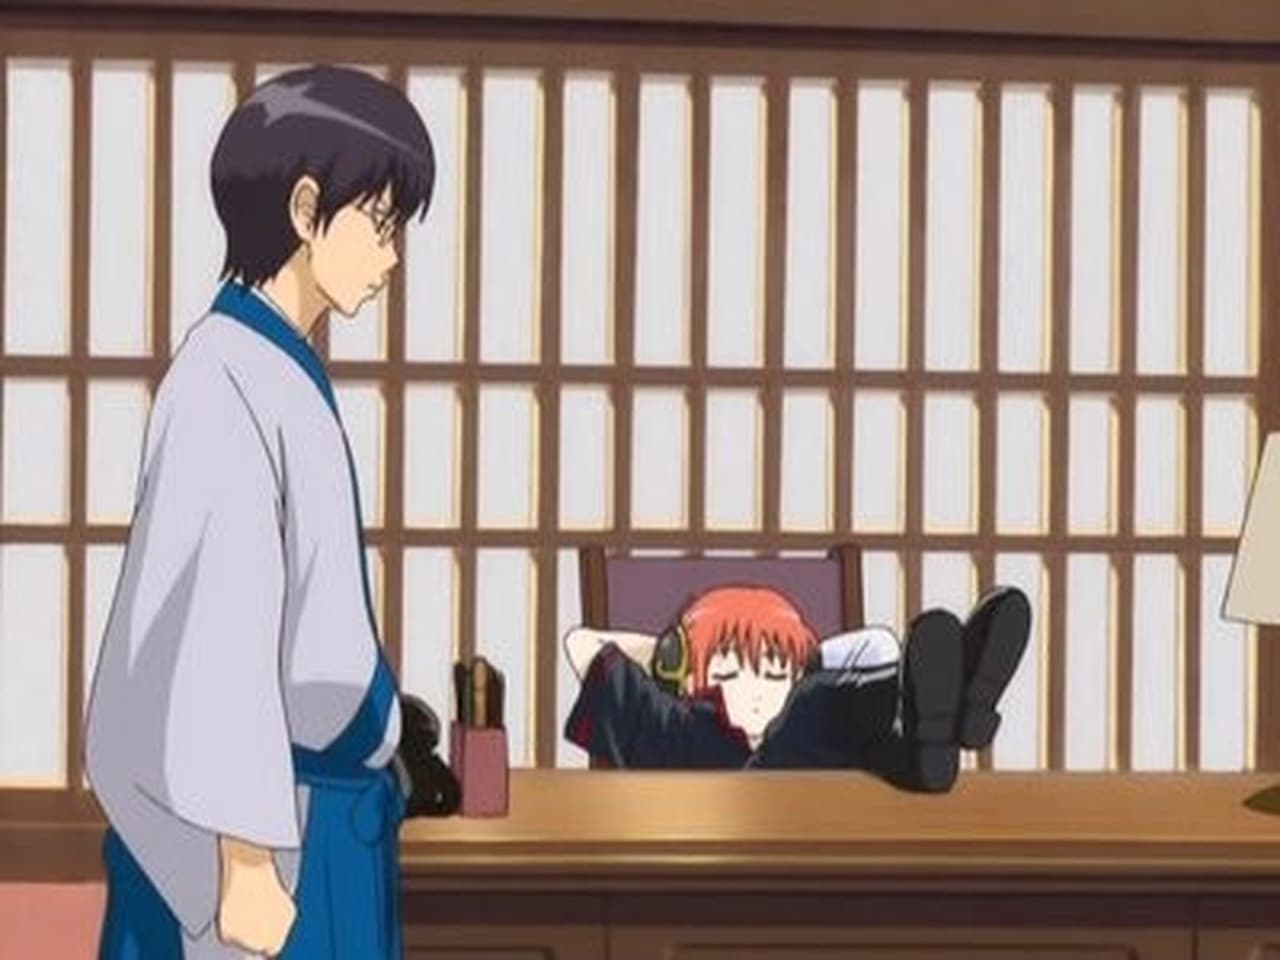 Gintama - Season 2 Episode 48 : Exaggerate the Tales of Your Exploits by a Third, So Everyone Has a Good Time / Men Have a Weakness for Girls Who Sell Flowers and Work in Pastry Shops